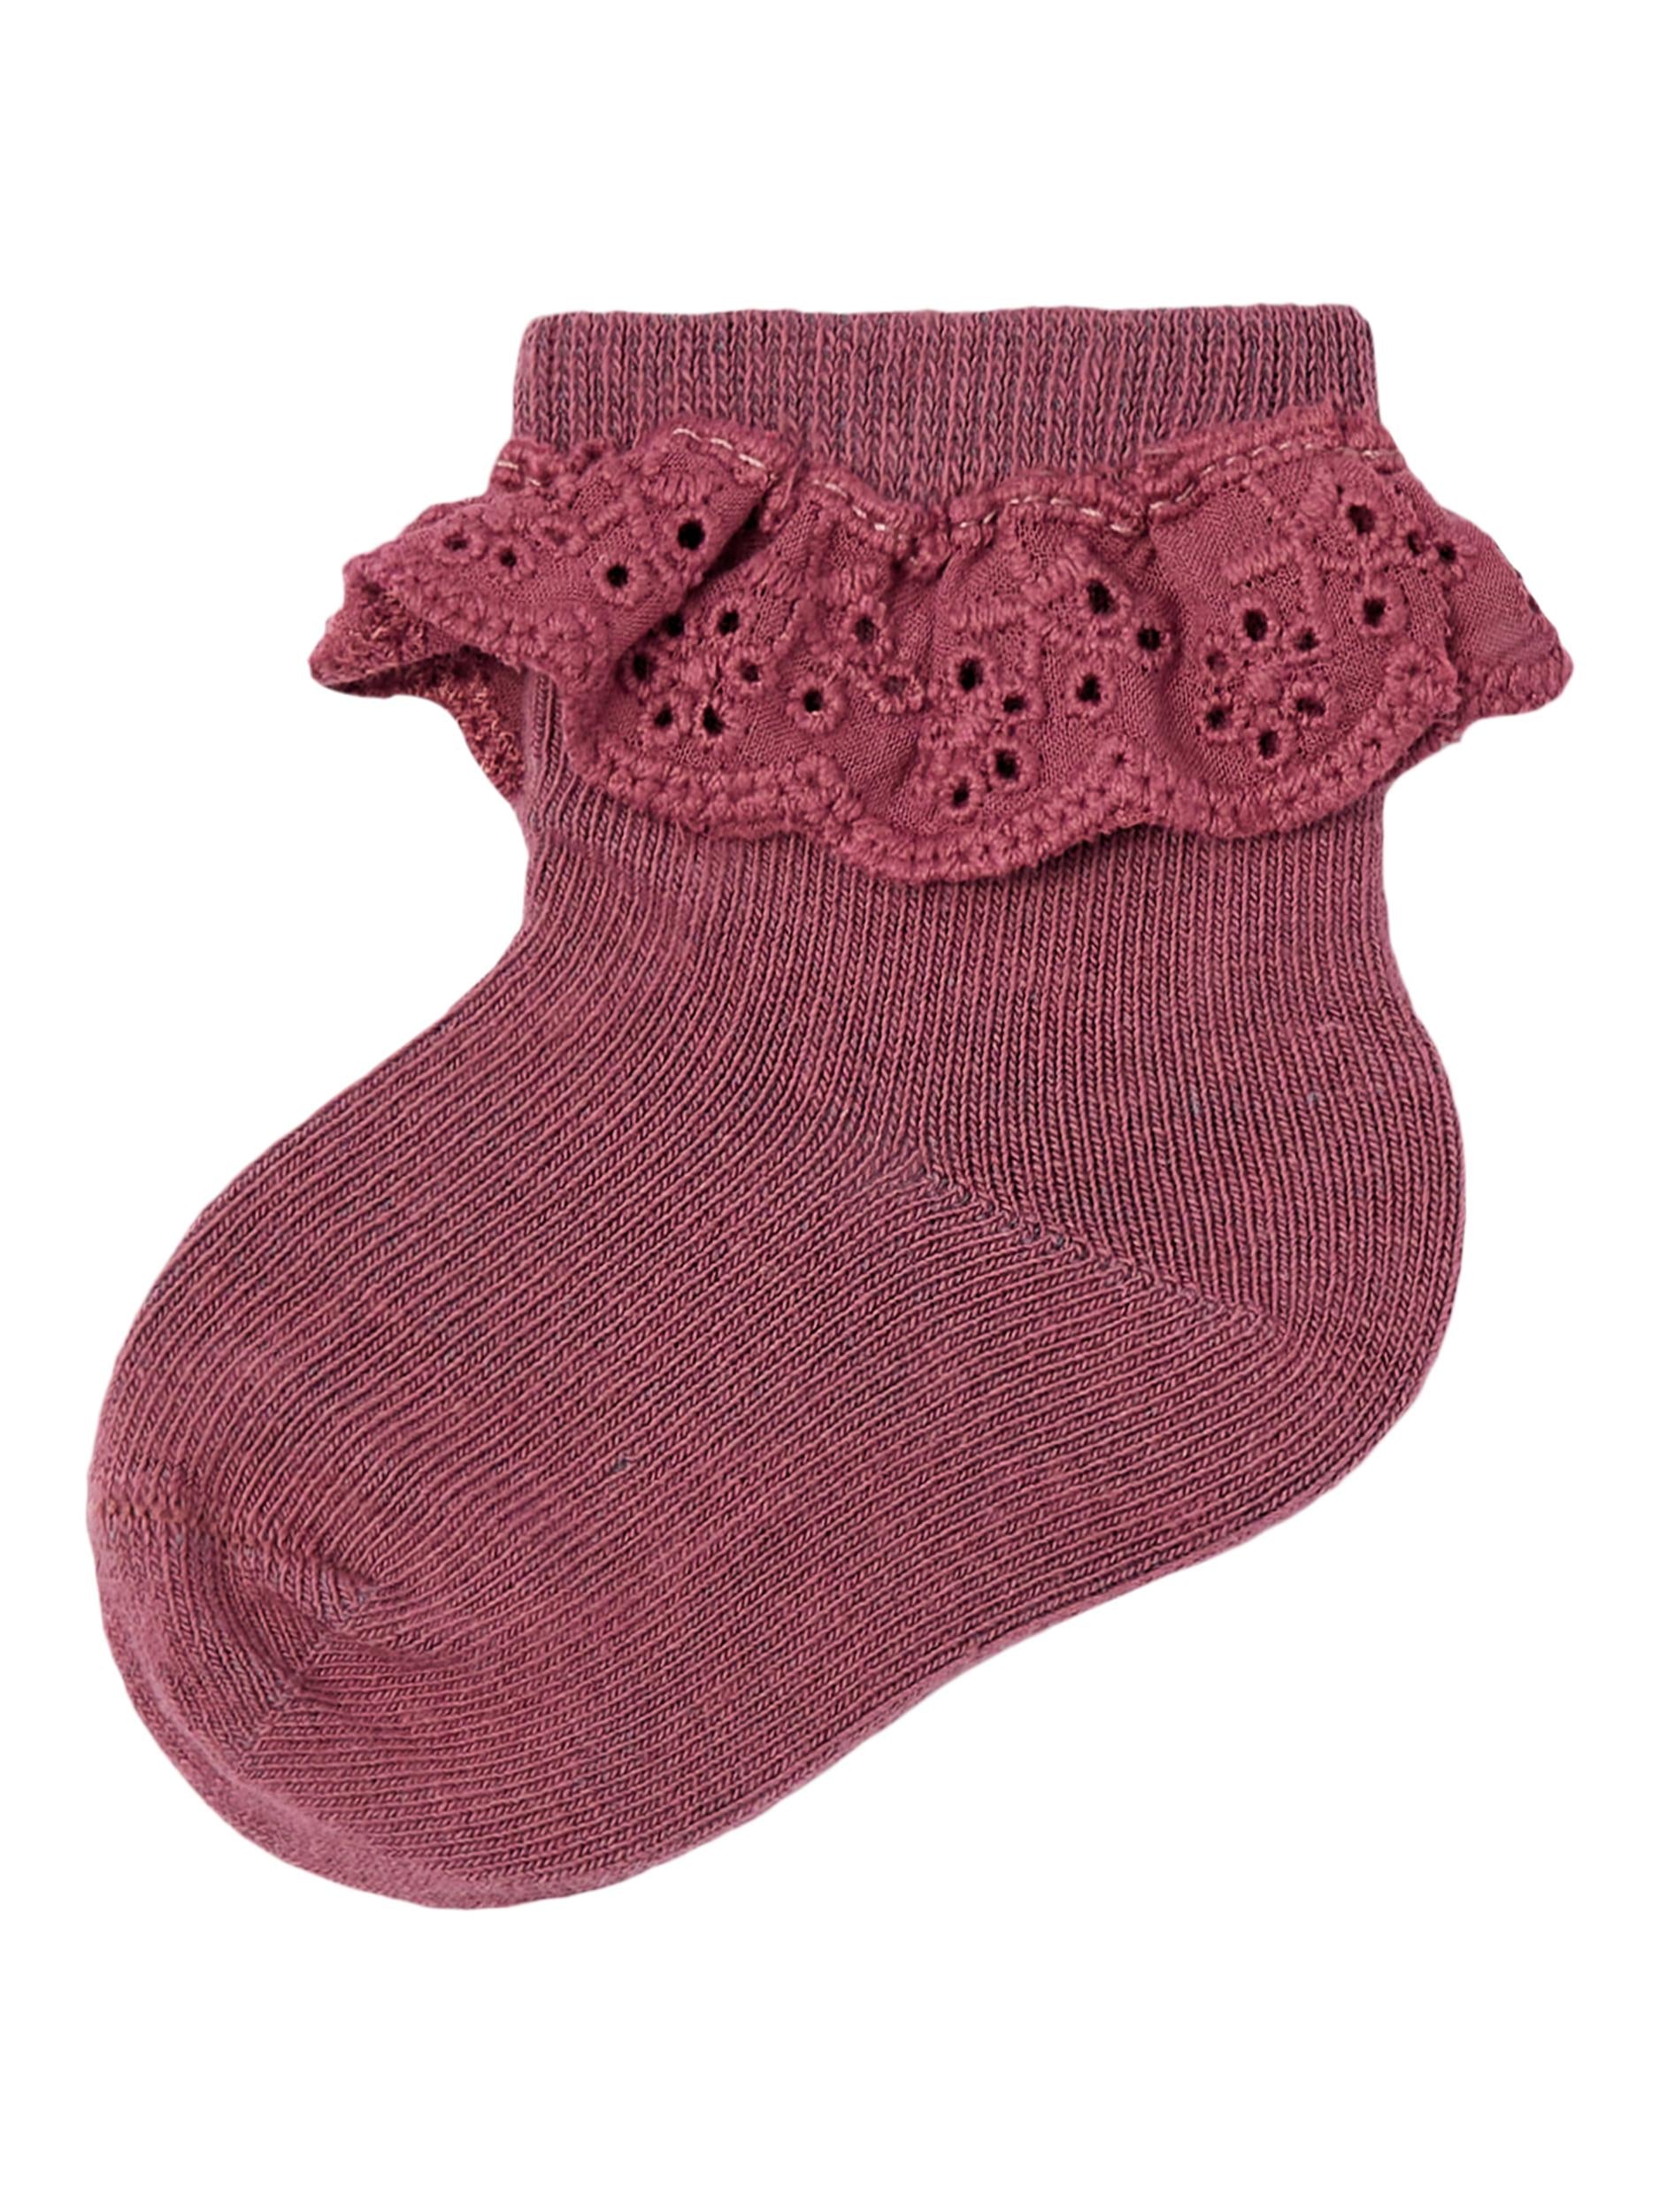 Titti Sock Crushed Berry - Front View